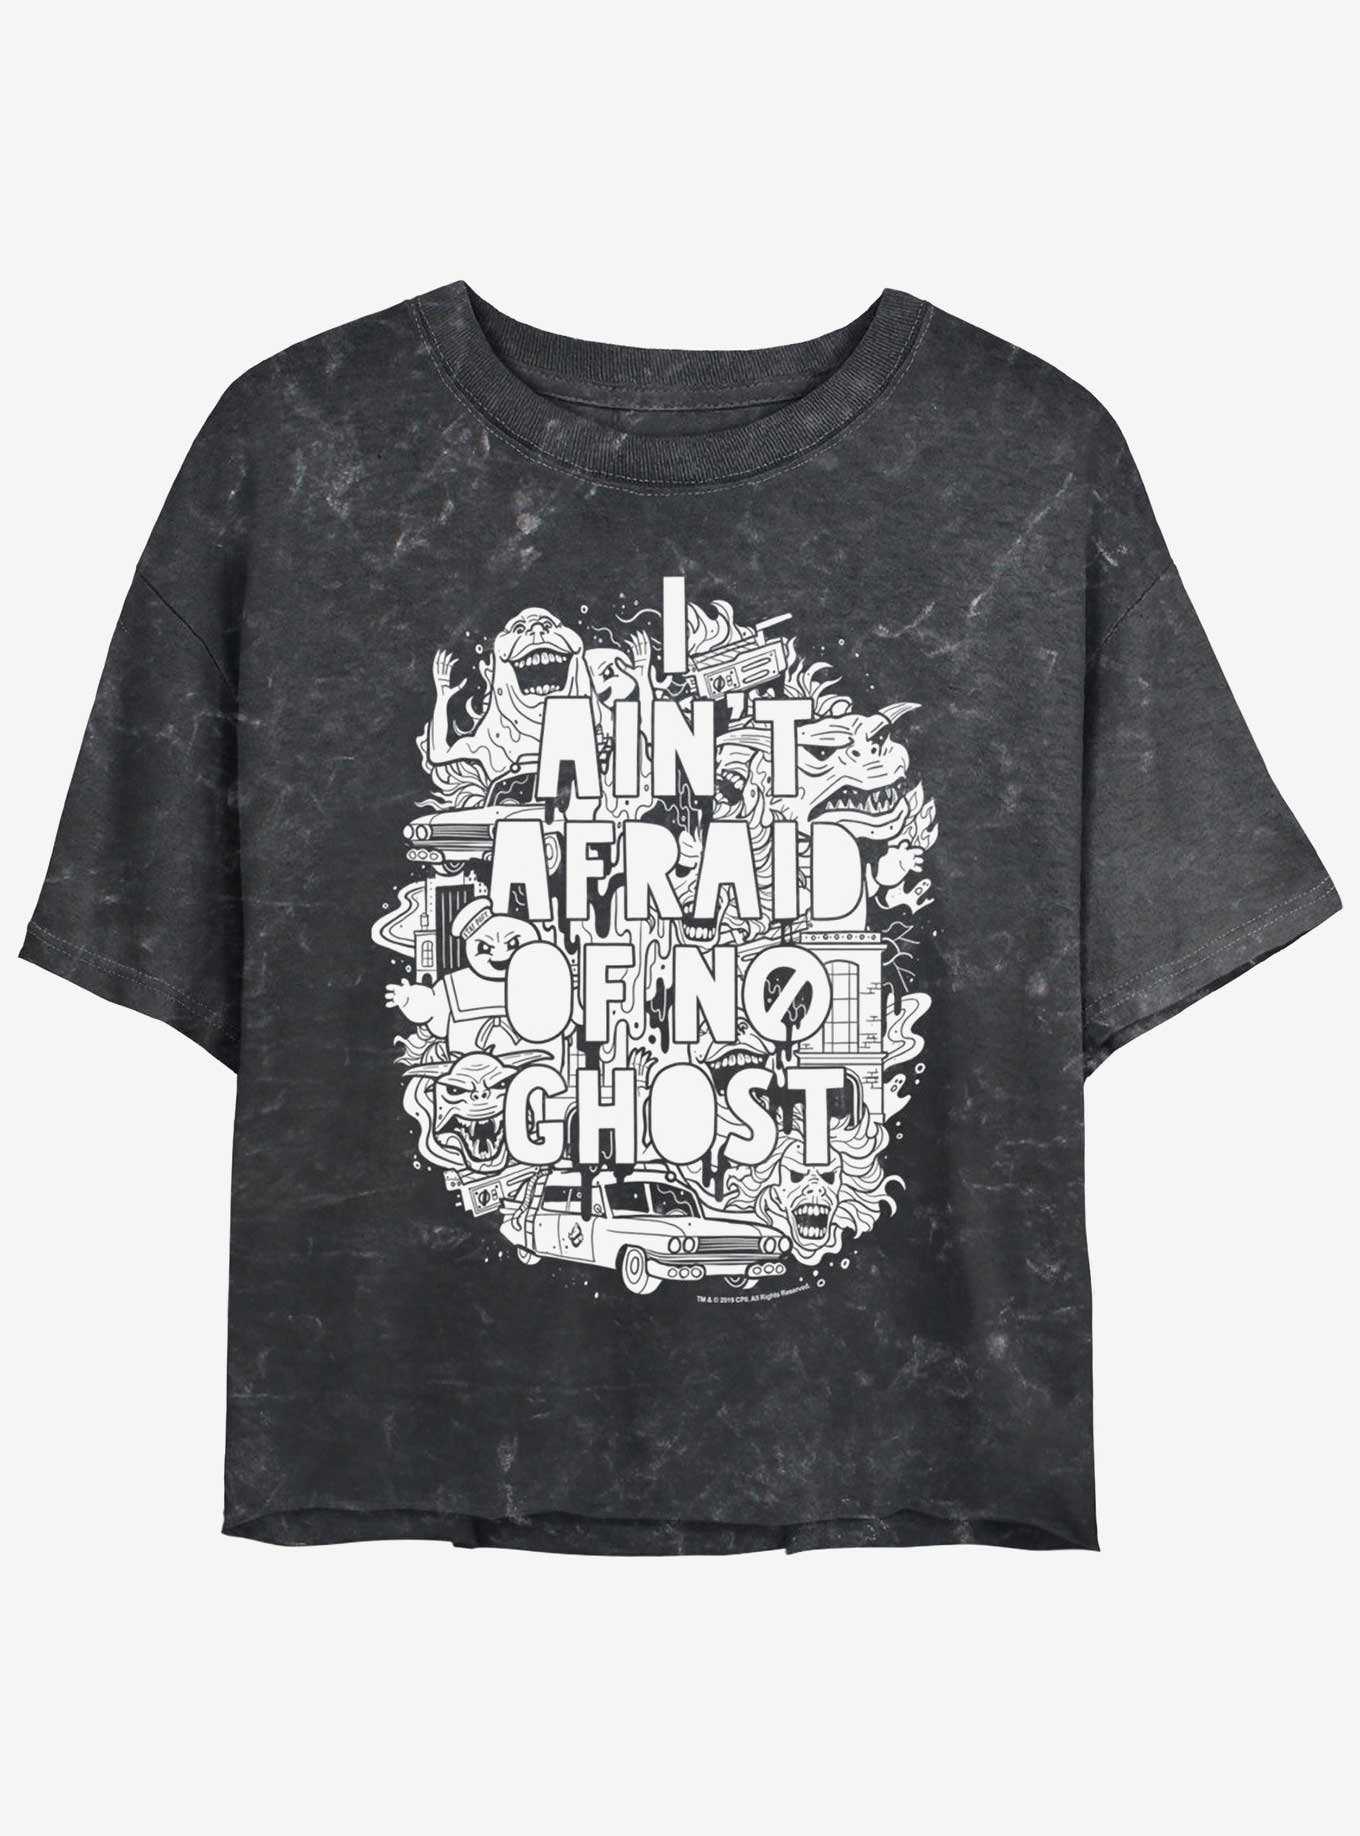 Ghostbusters Ain't Afraid Of No Ghost Girls Mineral Wash Crop T-Shirt, , hi-res